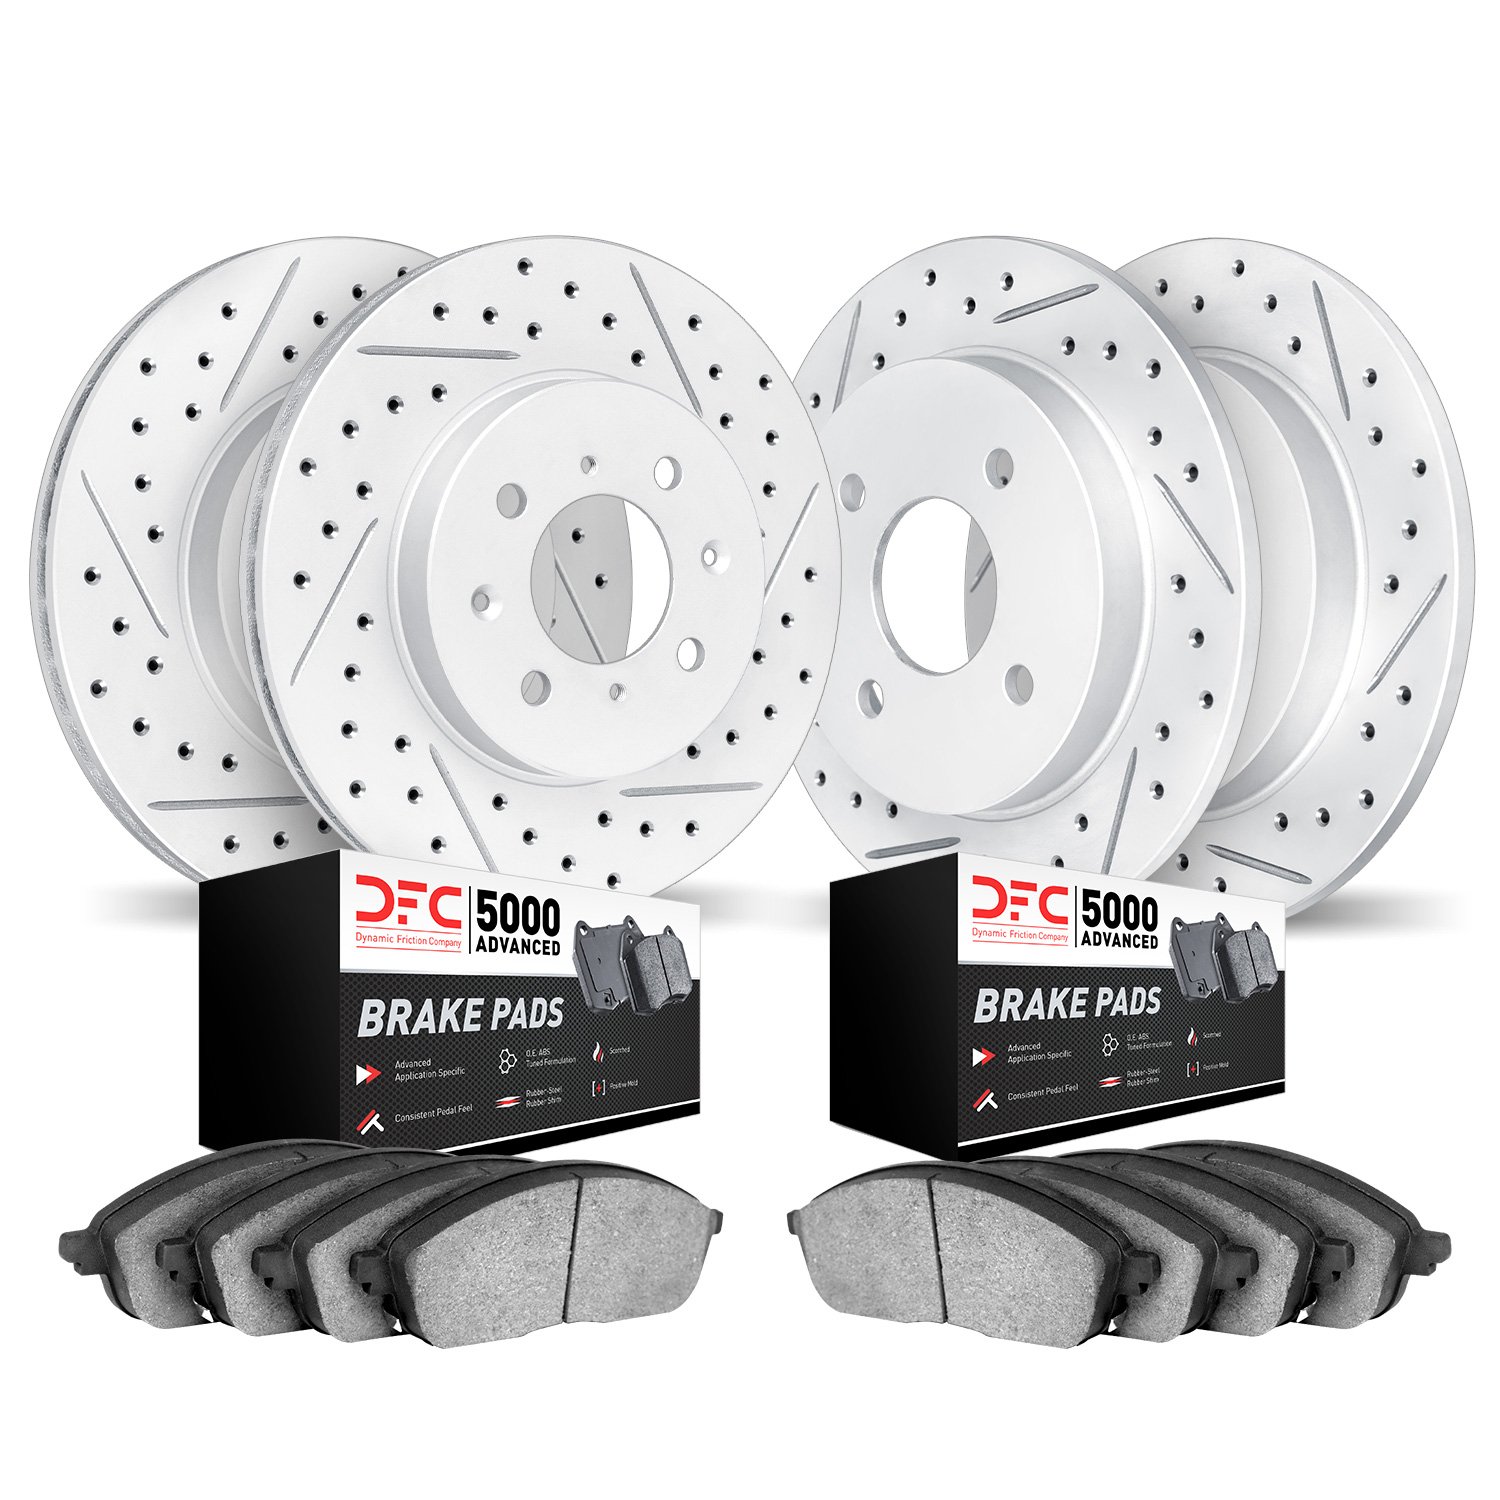 2504-67054 Geoperformance Drilled/Slotted Rotors w/5000 Advanced Brake Pads Kit, 2000-2006 Infiniti/Nissan, Position: Front and